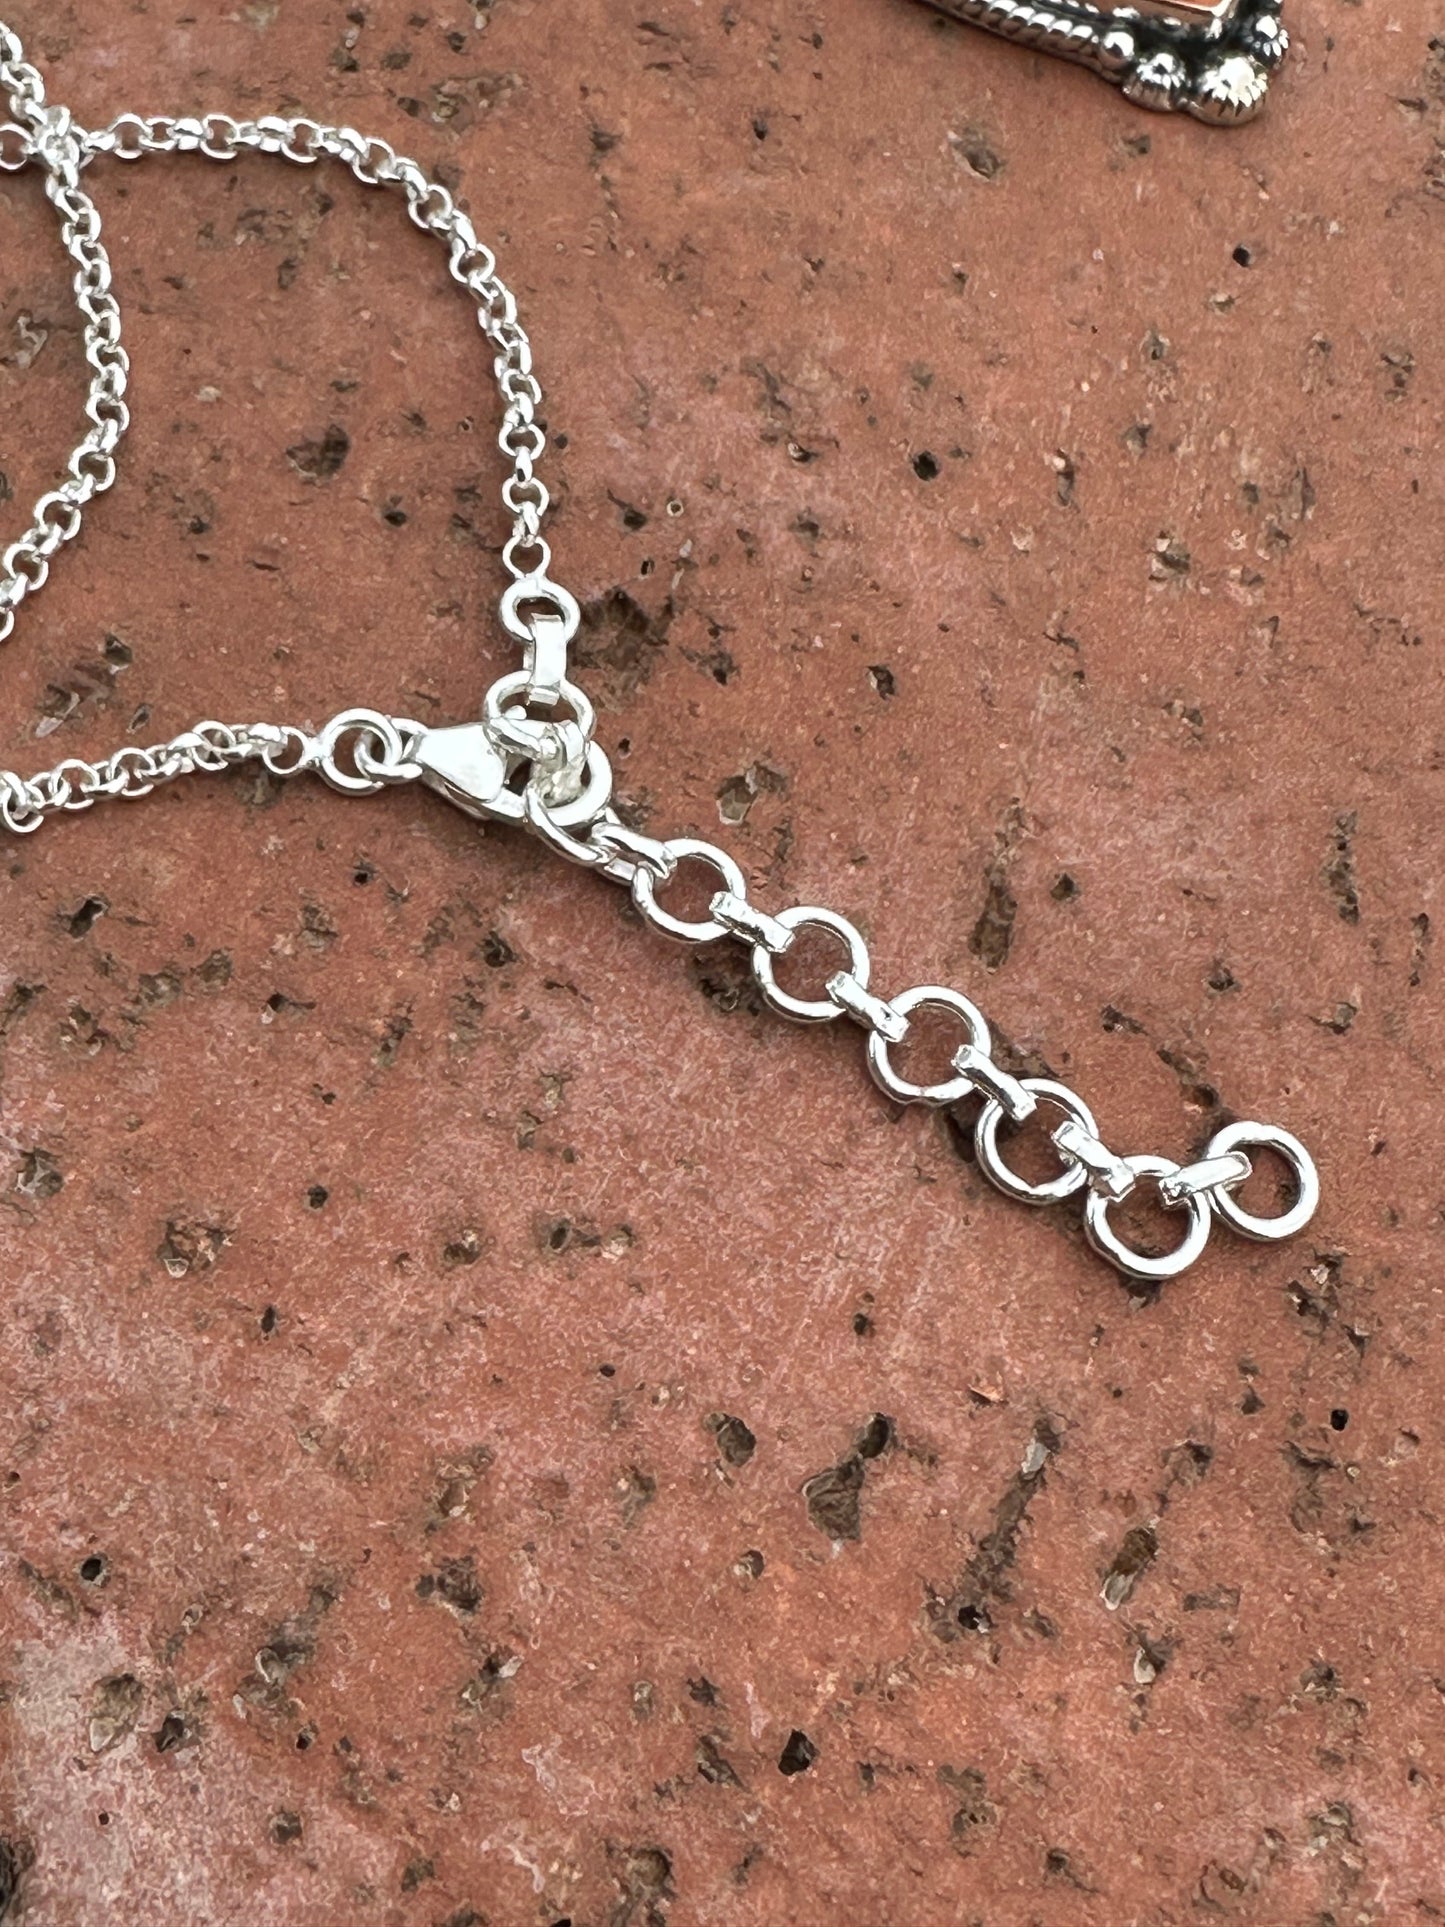 Handmade Sterling Silver  Dream Heart Necklaces